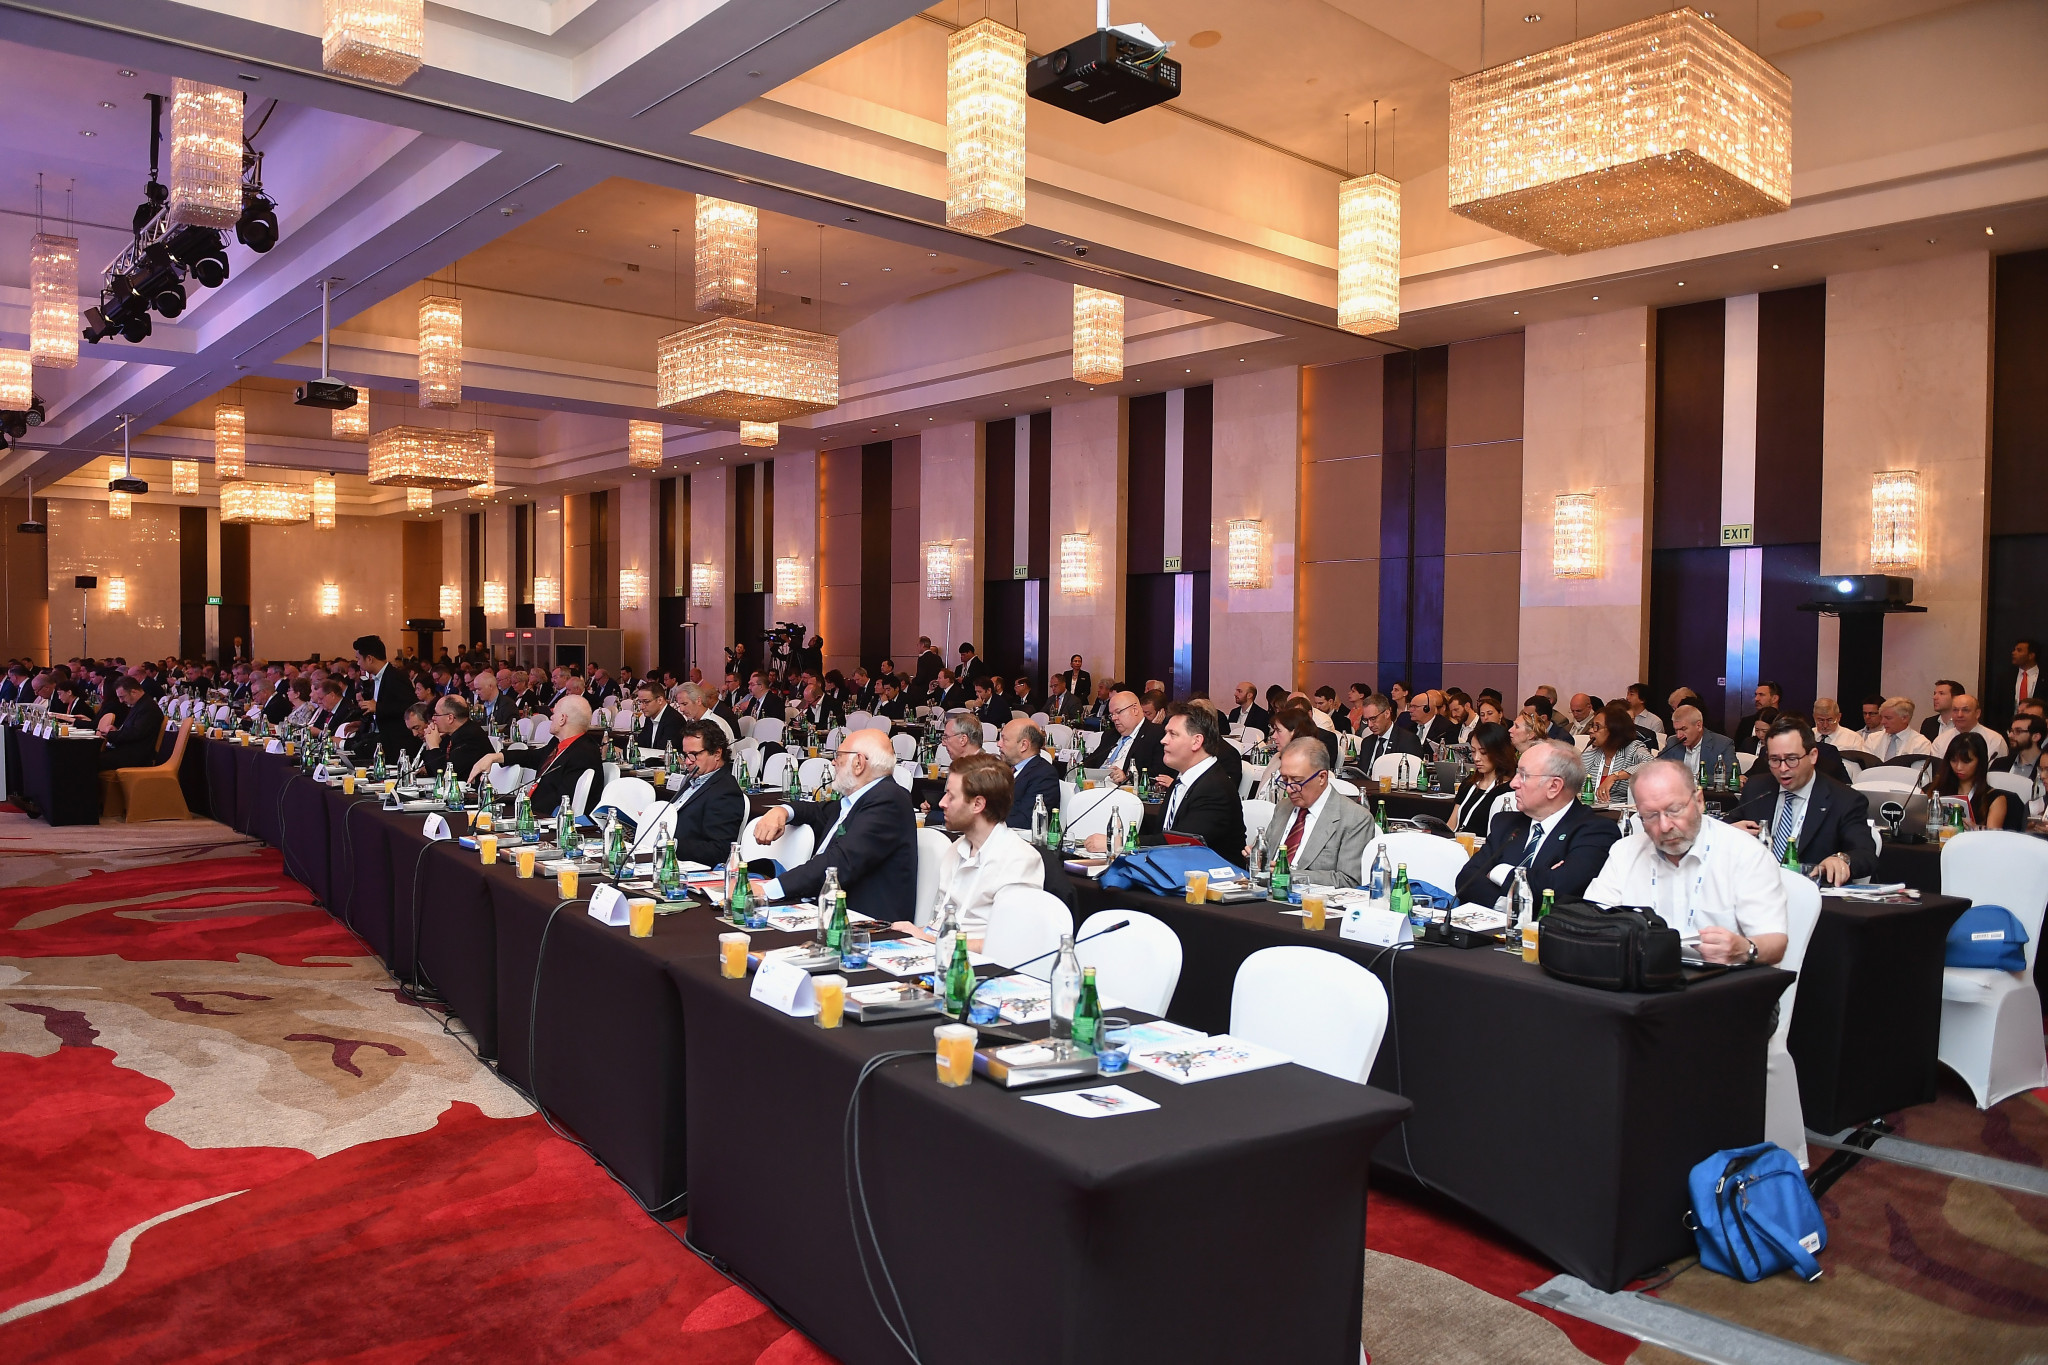 It was a packed conference room at the Centara Convention Centre ©SportAccord/Flickr